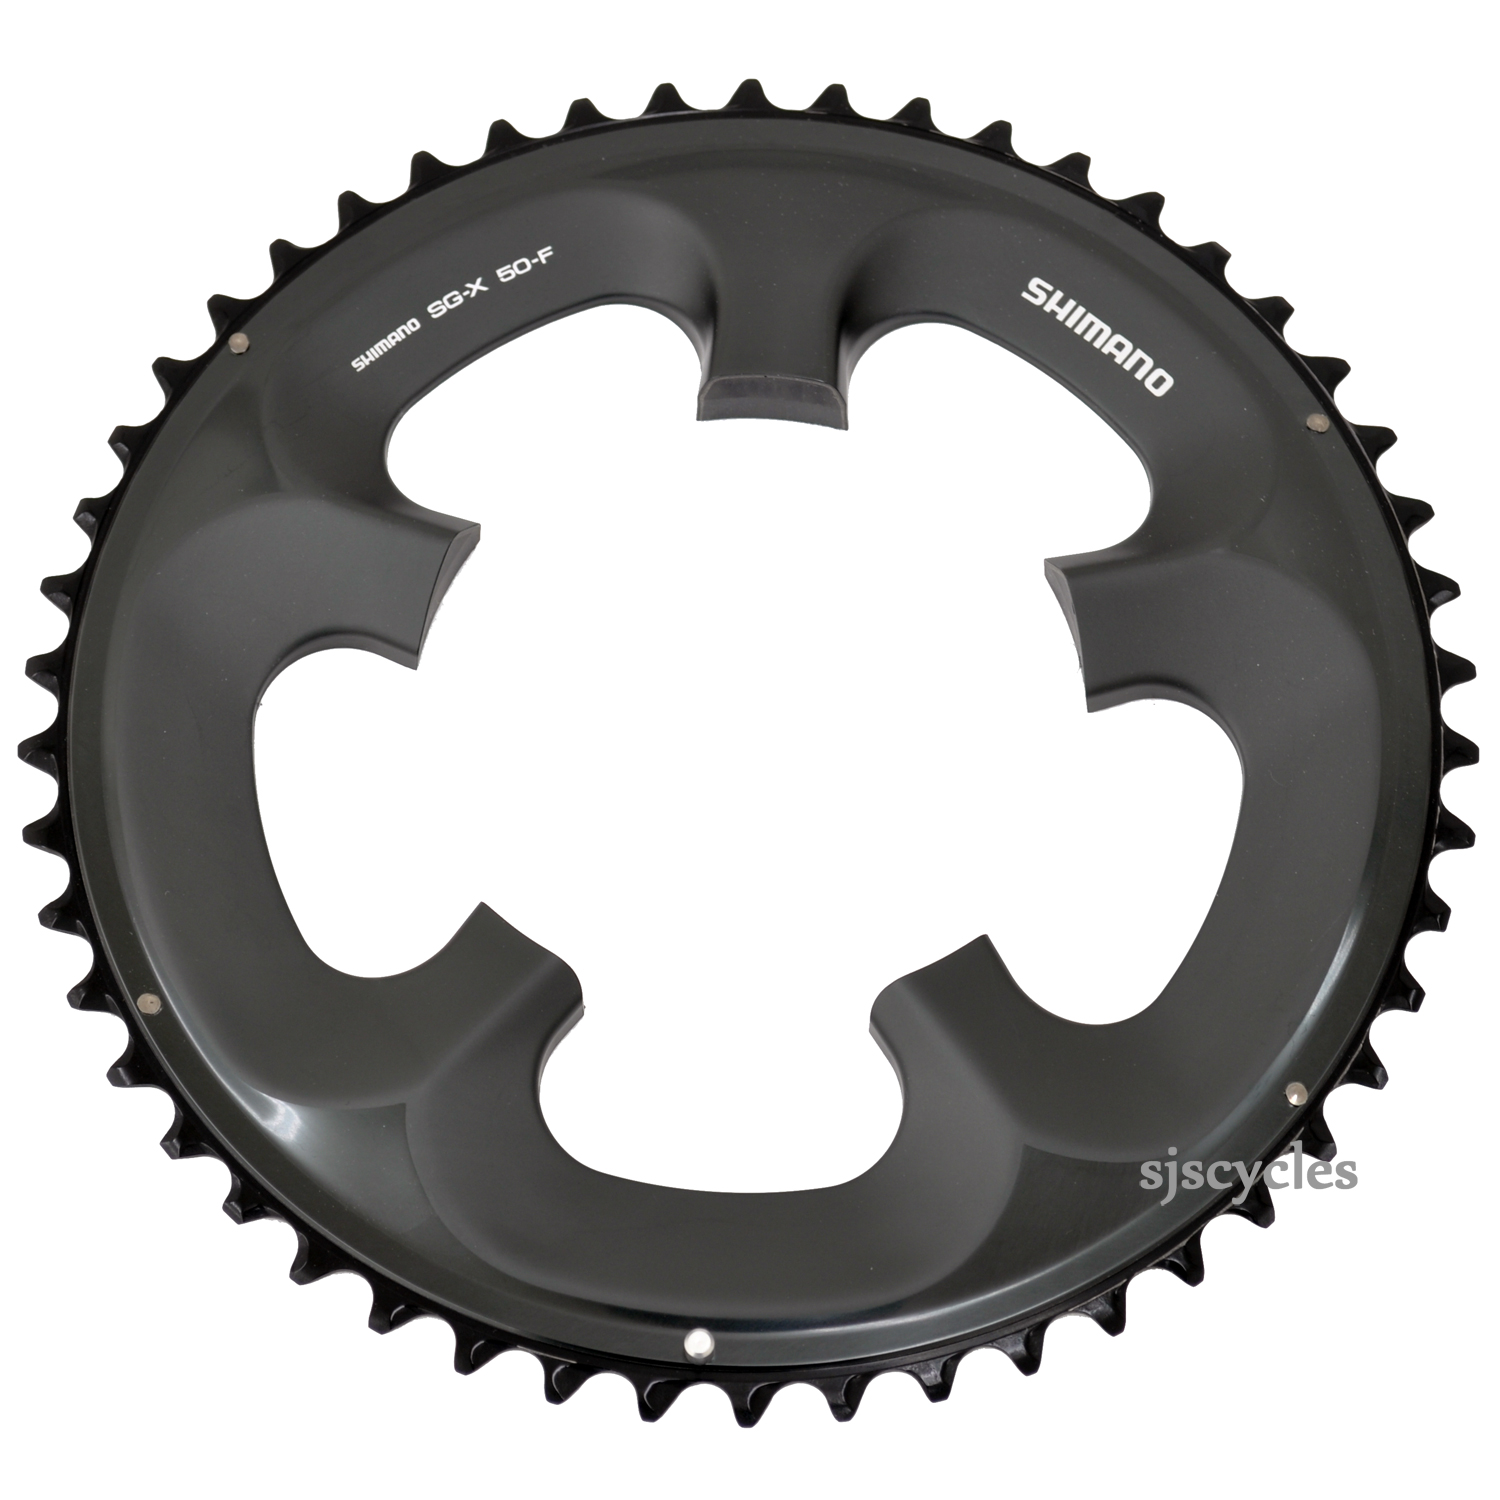 Double Shimano Ultegra FC-6750 Chainring 50T Glossy Grey 110mm BCD